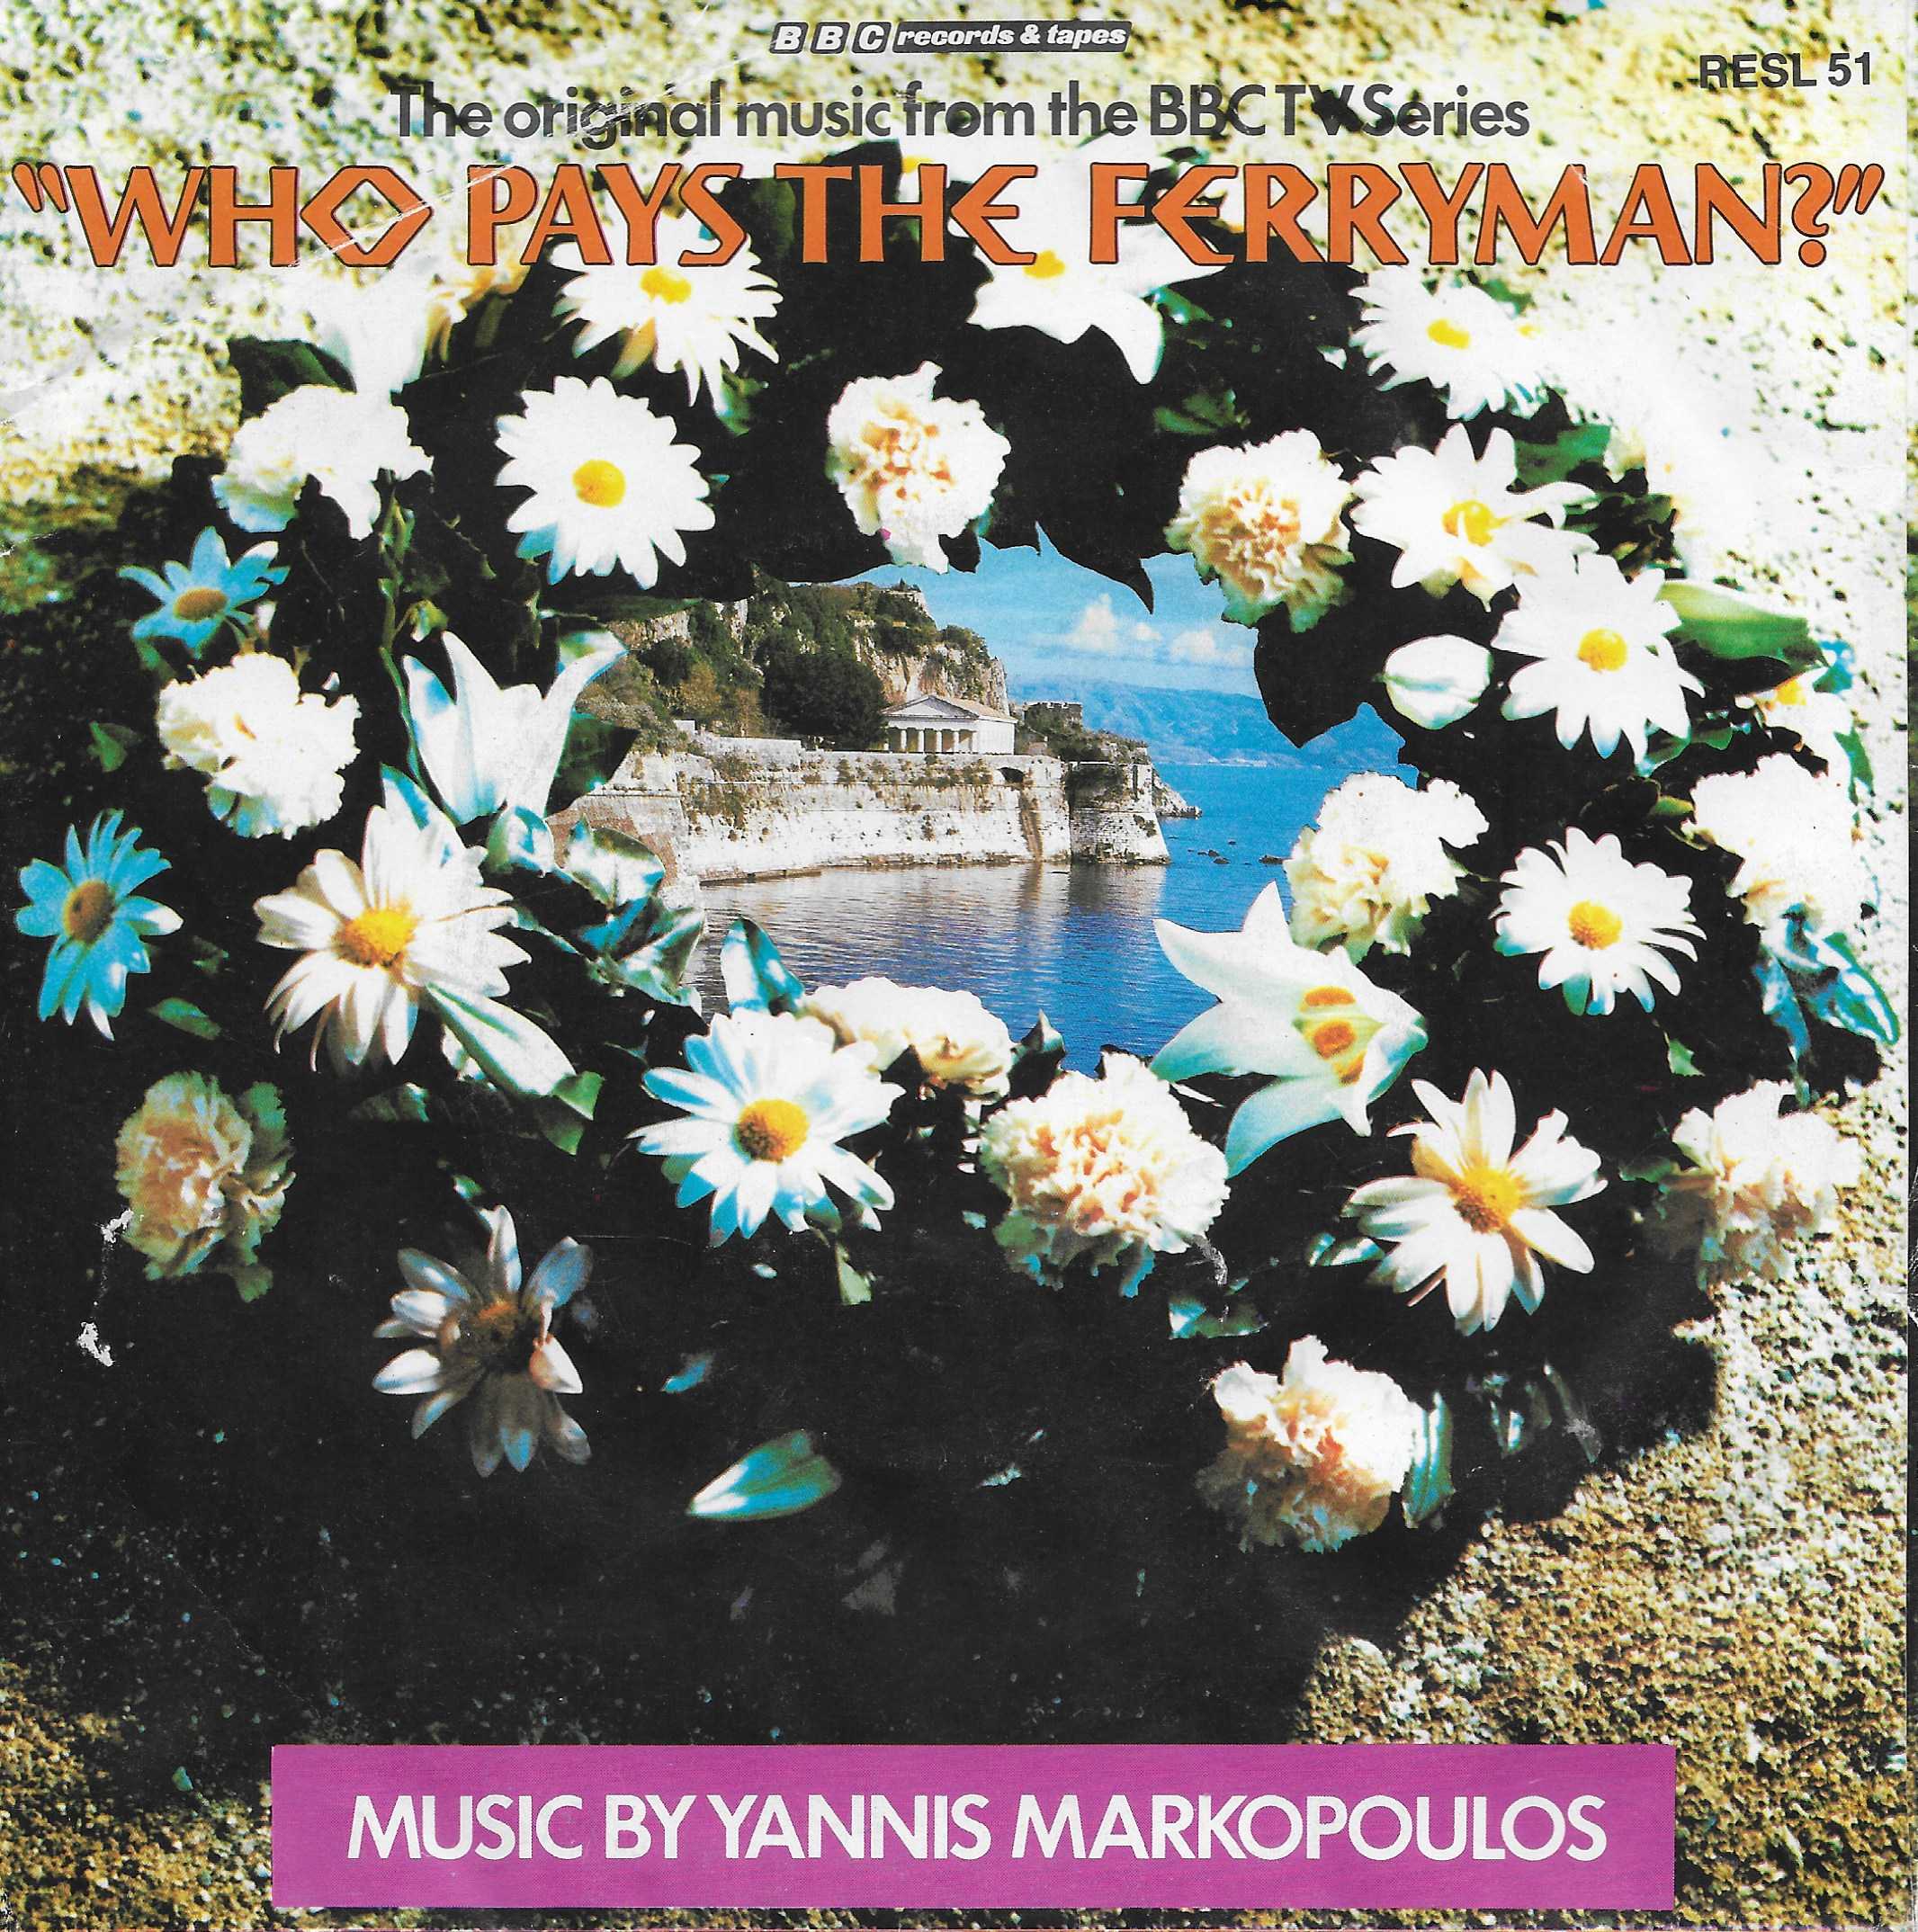 Picture of RESL 51-iDr Who pays the ferryman? by artist Yannis Markopoulos from the BBC singles - Records and Tapes library